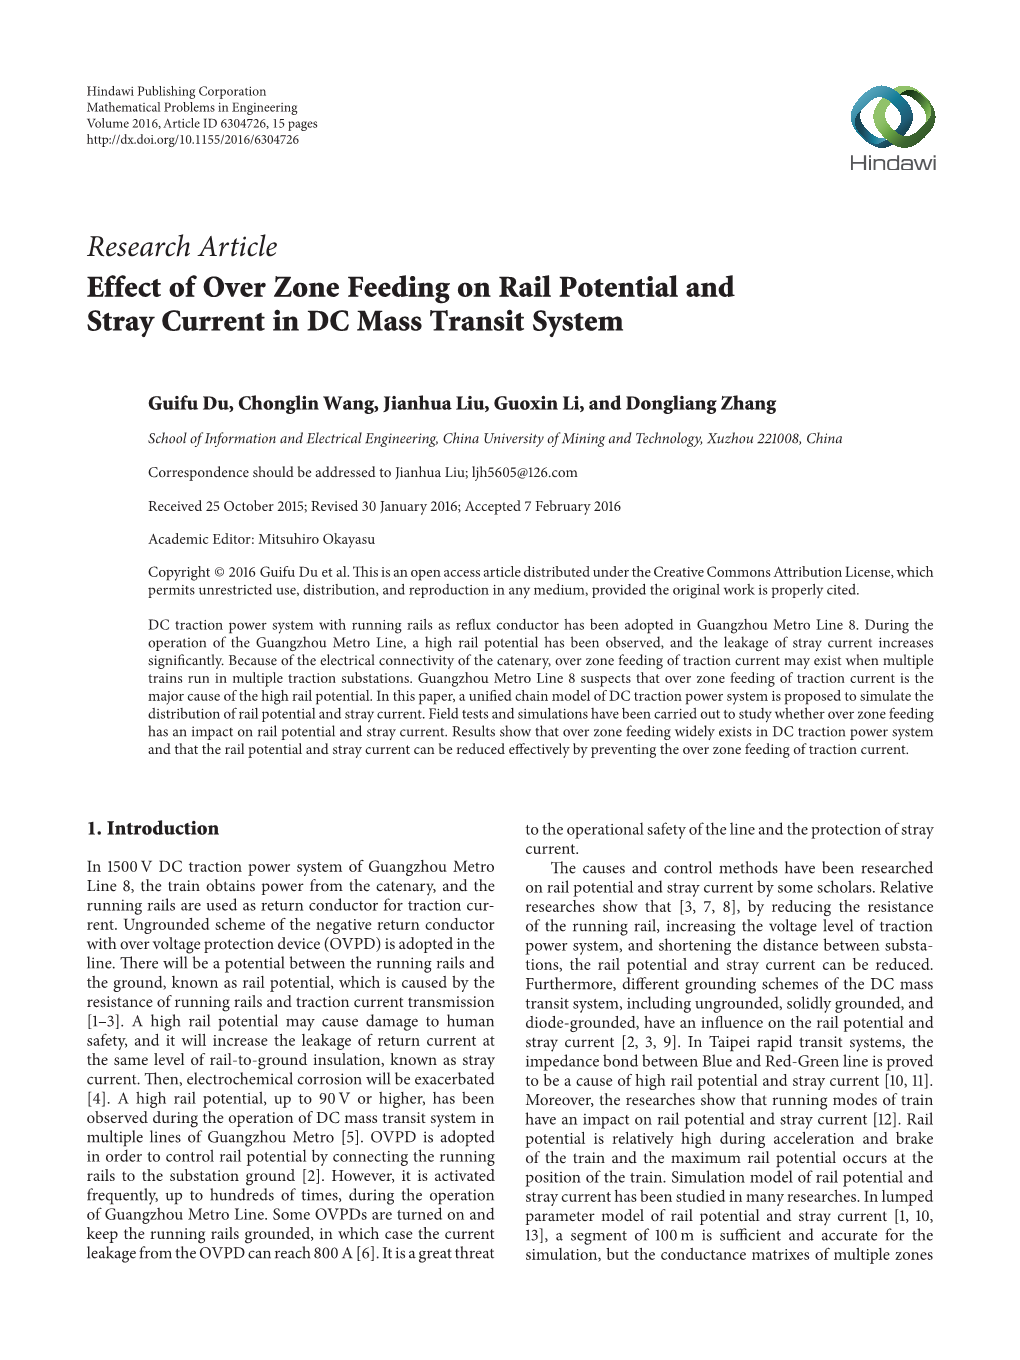 Research Article Effect of Over Zone Feeding on Rail Potential and Stray Current in DC Mass Transit System